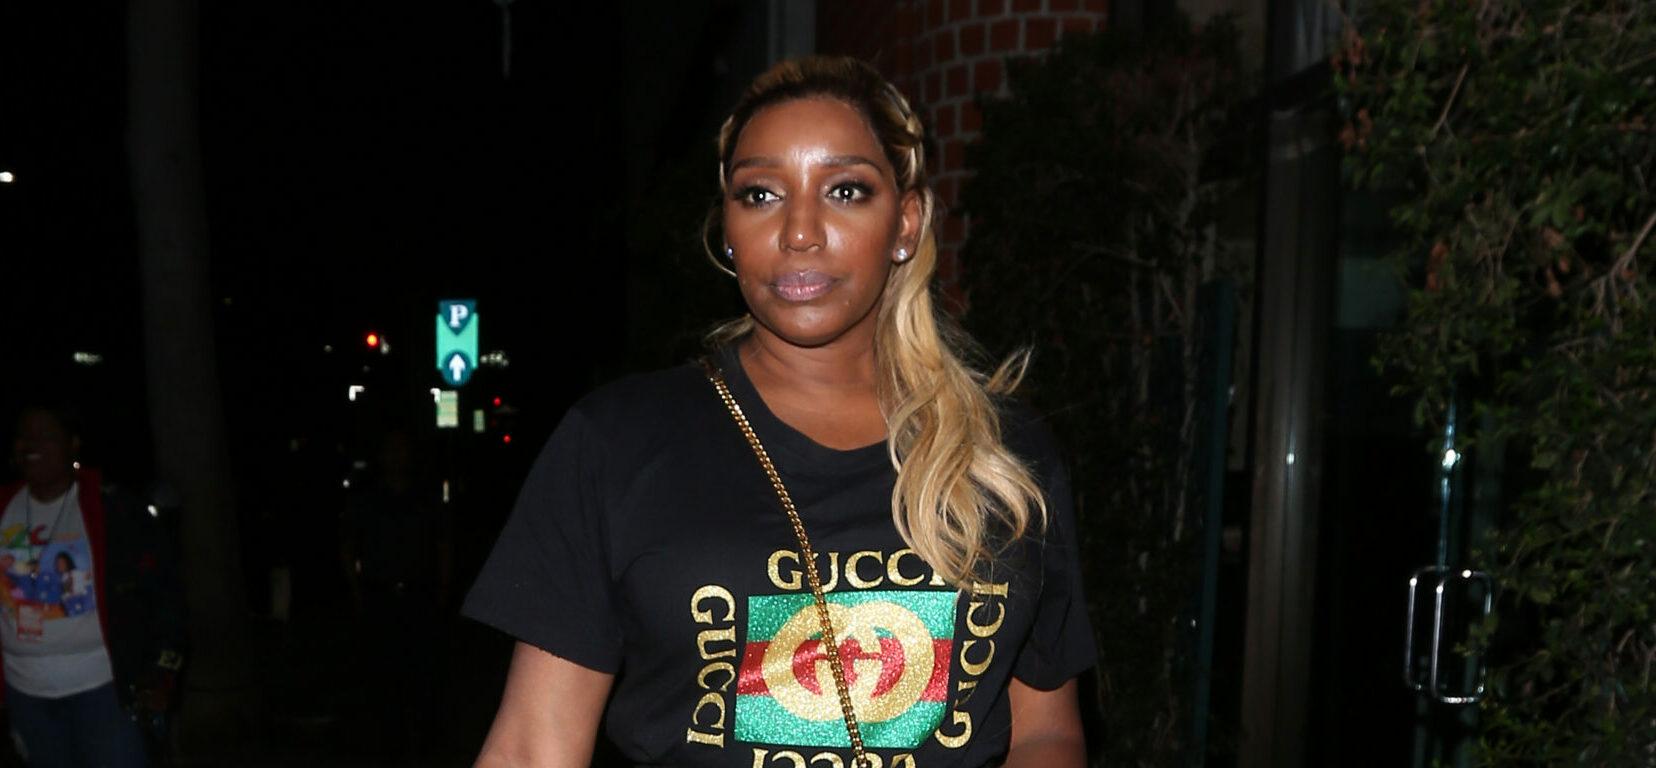 NeNe Leakes Hints At Trouble In Relationship With New BF: ‘Narcissistic Men’